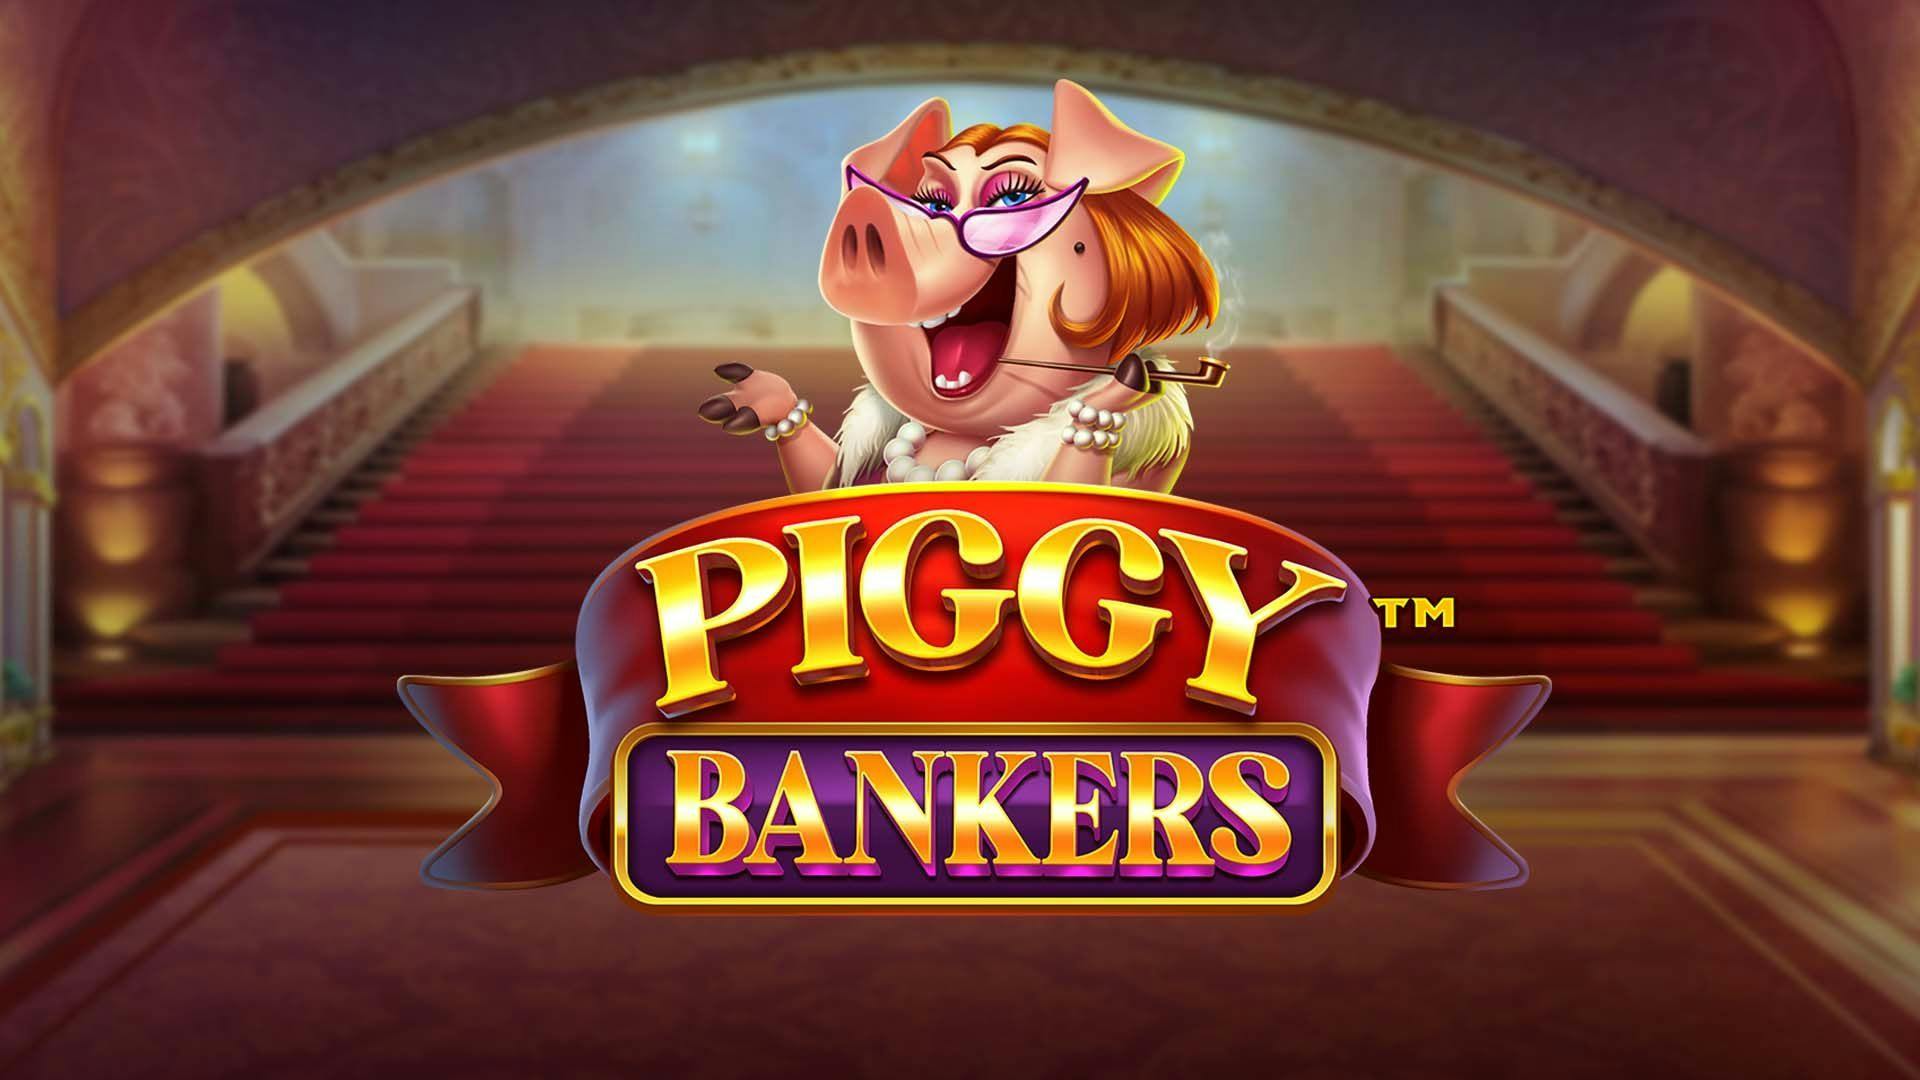 Piggy Bankers Slot Machine Online Free Game Play